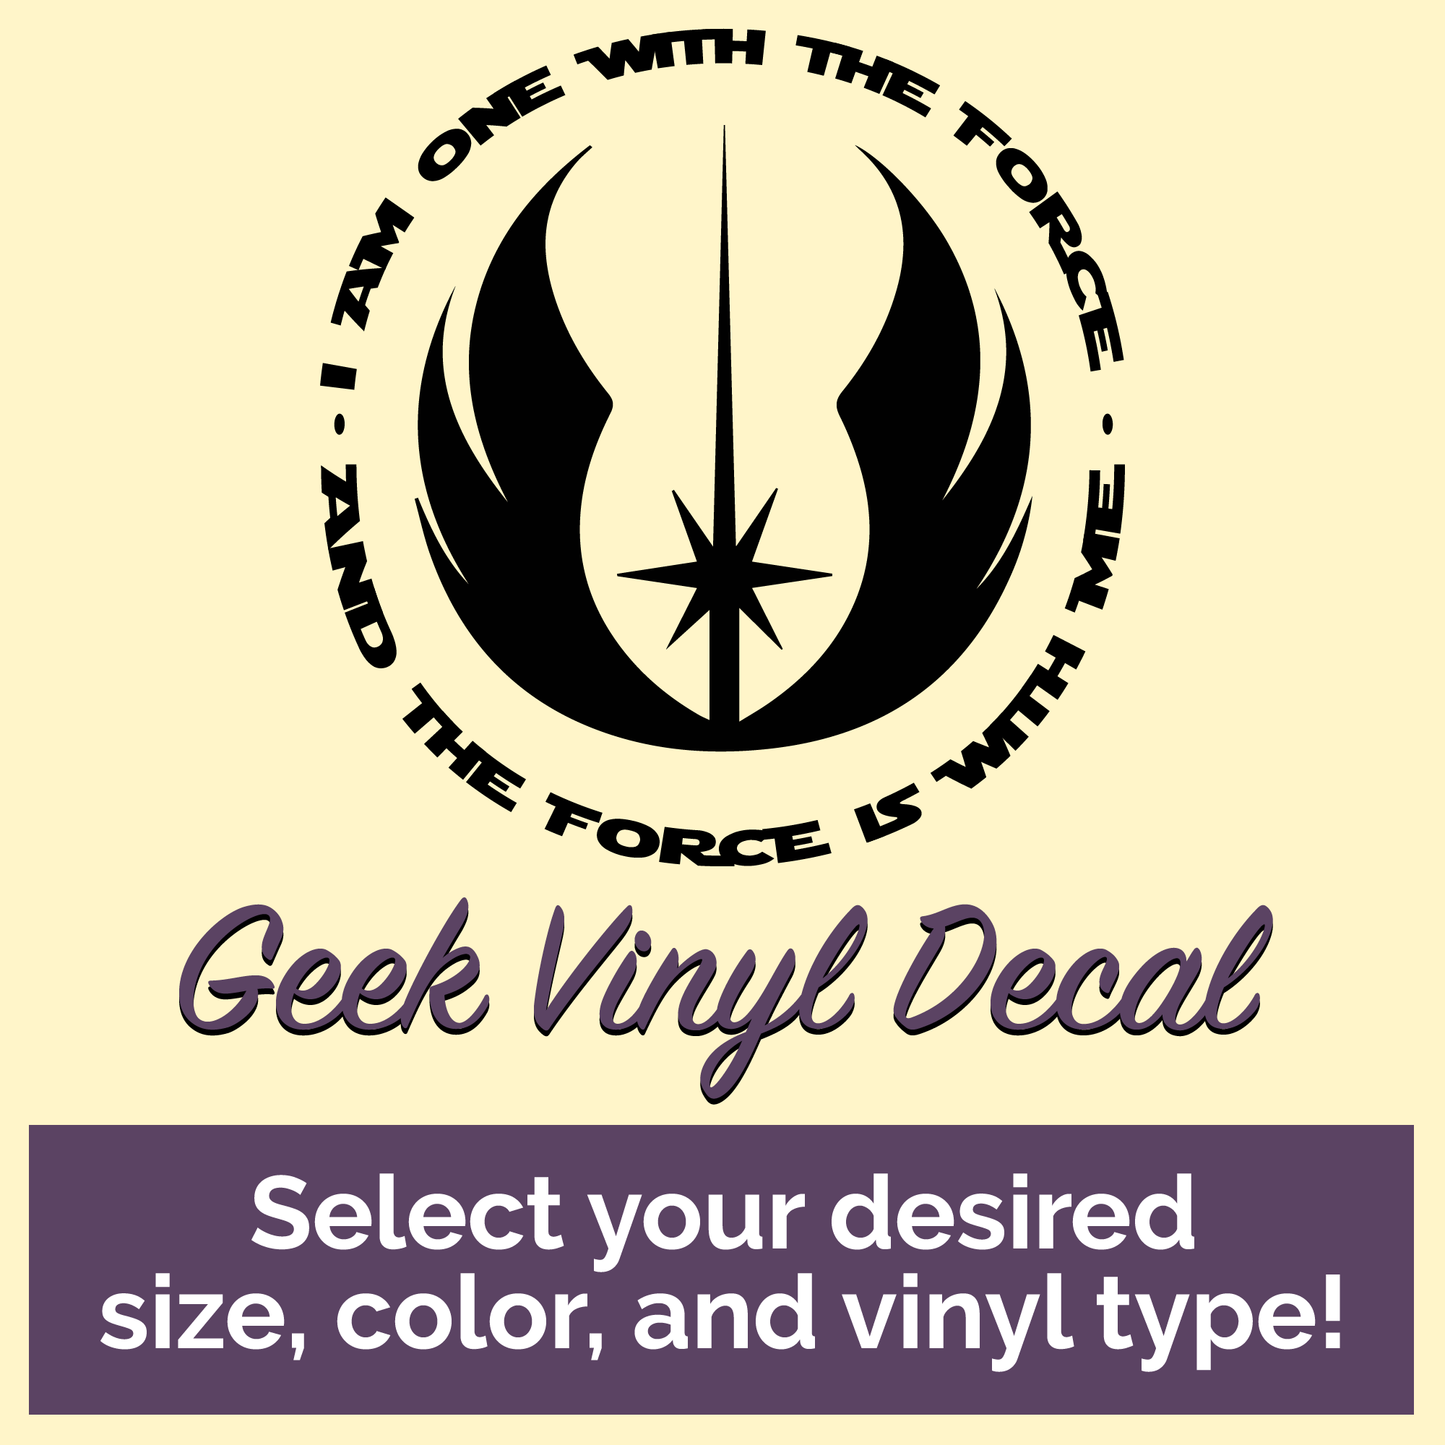 Jedi I Am One With the Force and the Force is With Me Geek Vinyl Decal